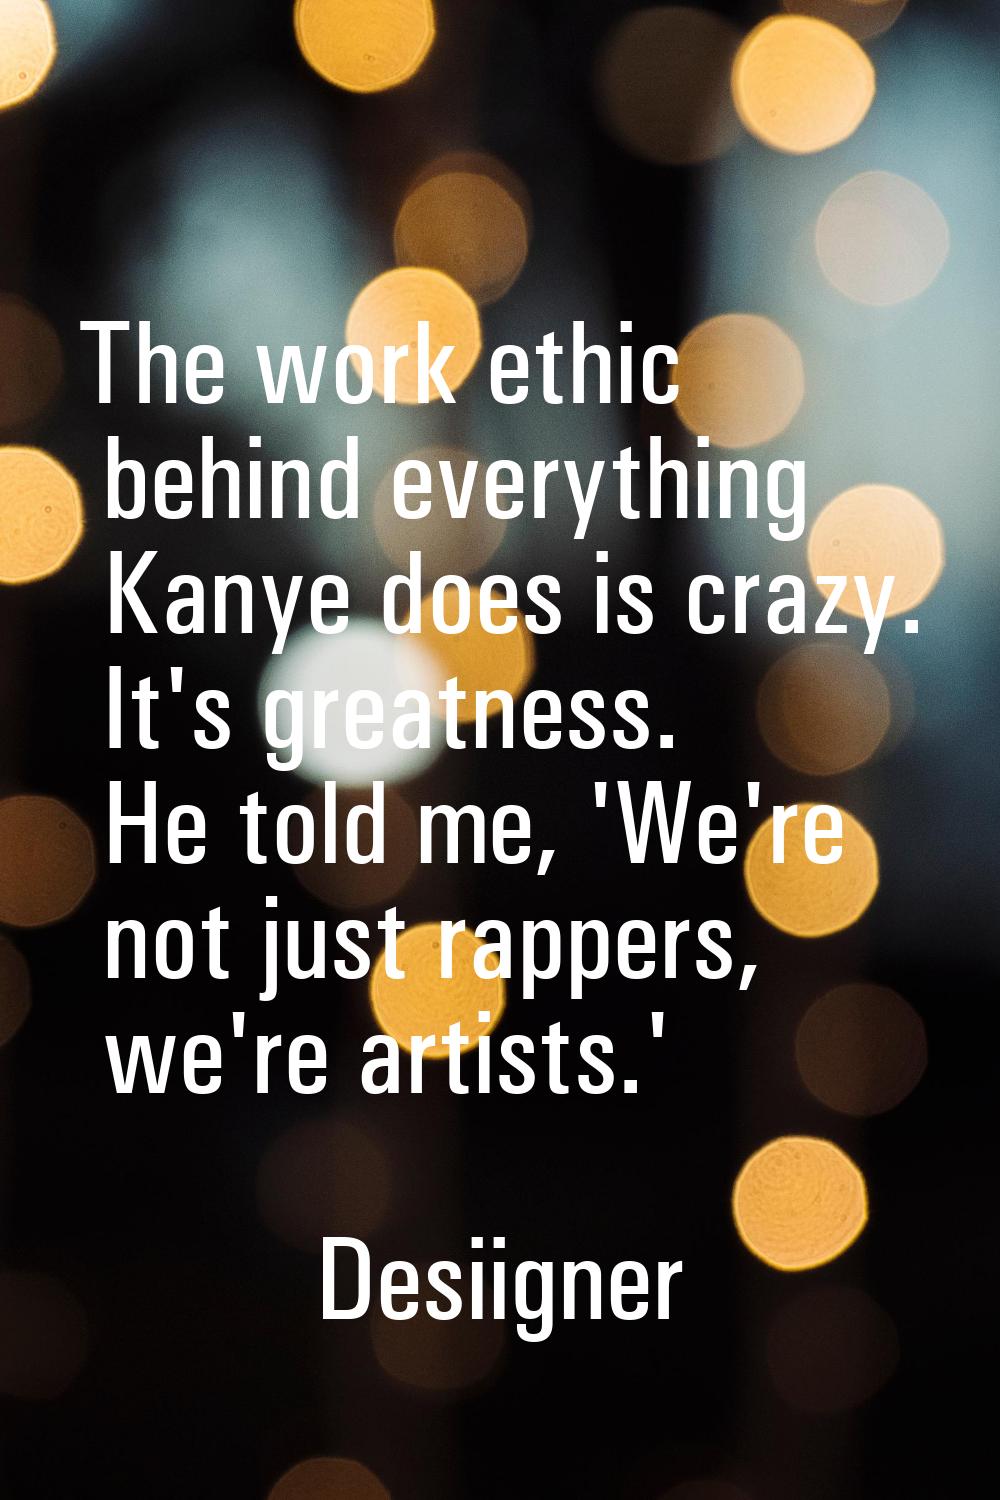 The work ethic behind everything Kanye does is crazy. It's greatness. He told me, 'We're not just r